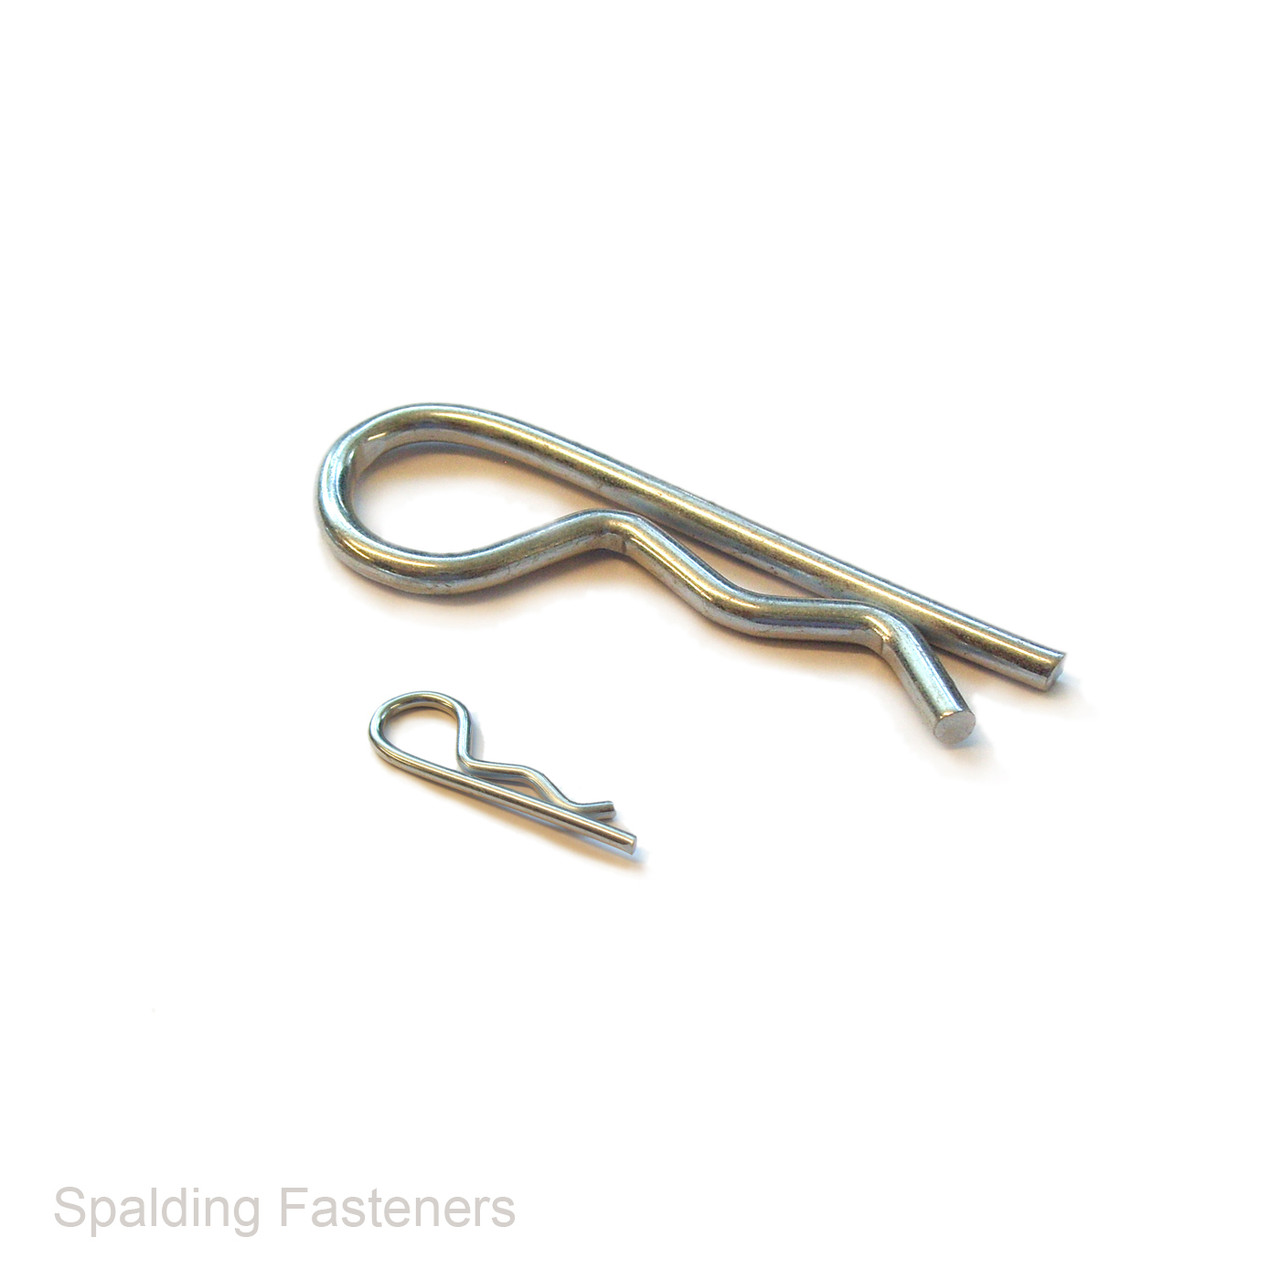 Metric Zinc Plated Steel R Clips 1.2 x 16mm To 6 x 117mm